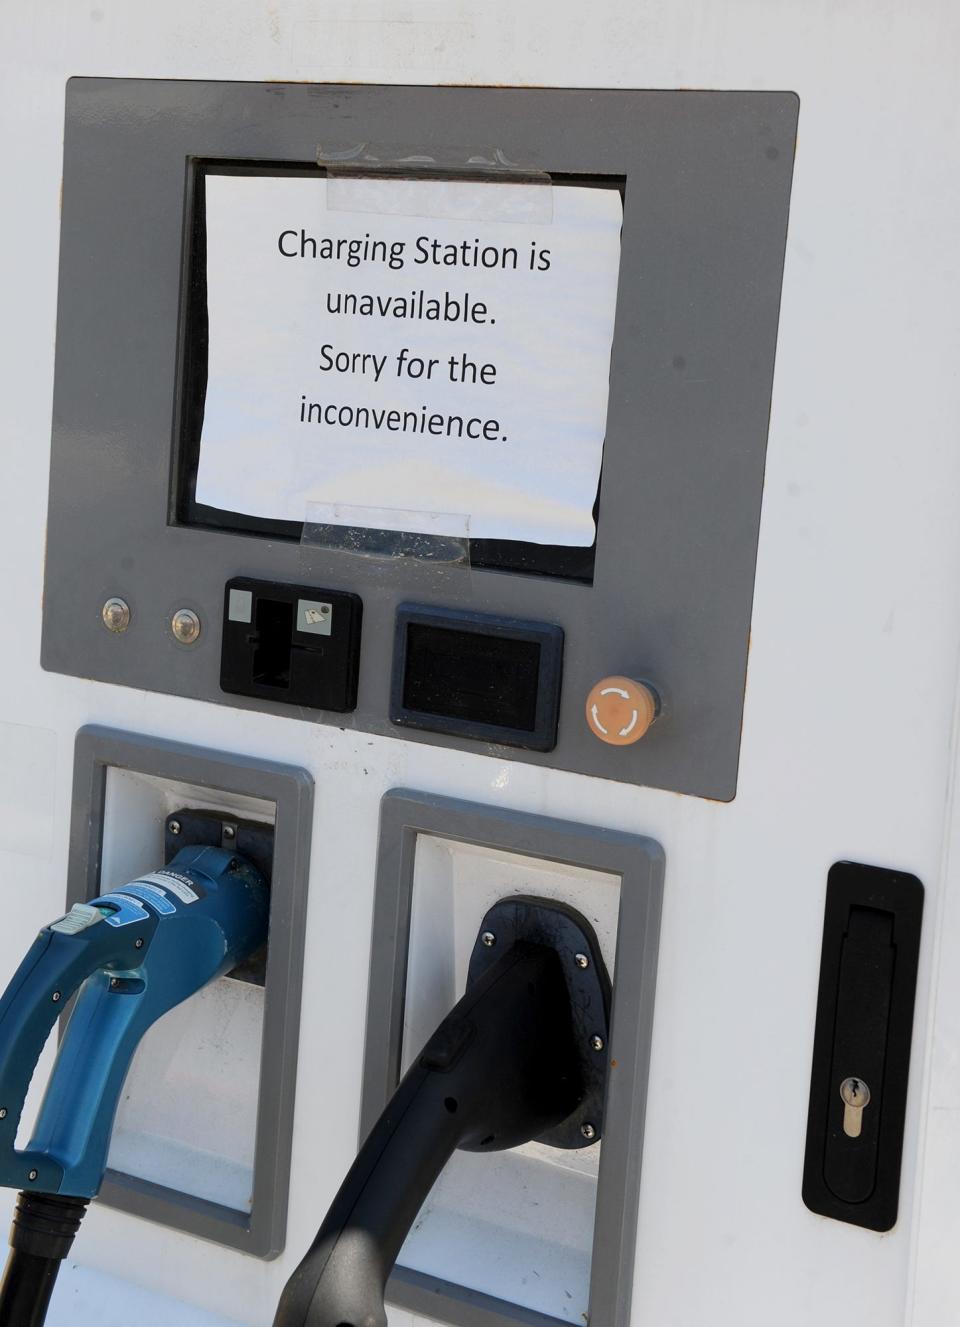 This electric vehicle charging station at the eastbound Mass Pike rest area in Natick has been out of commission for at least a year, according to two state senators, June 8, 2022.